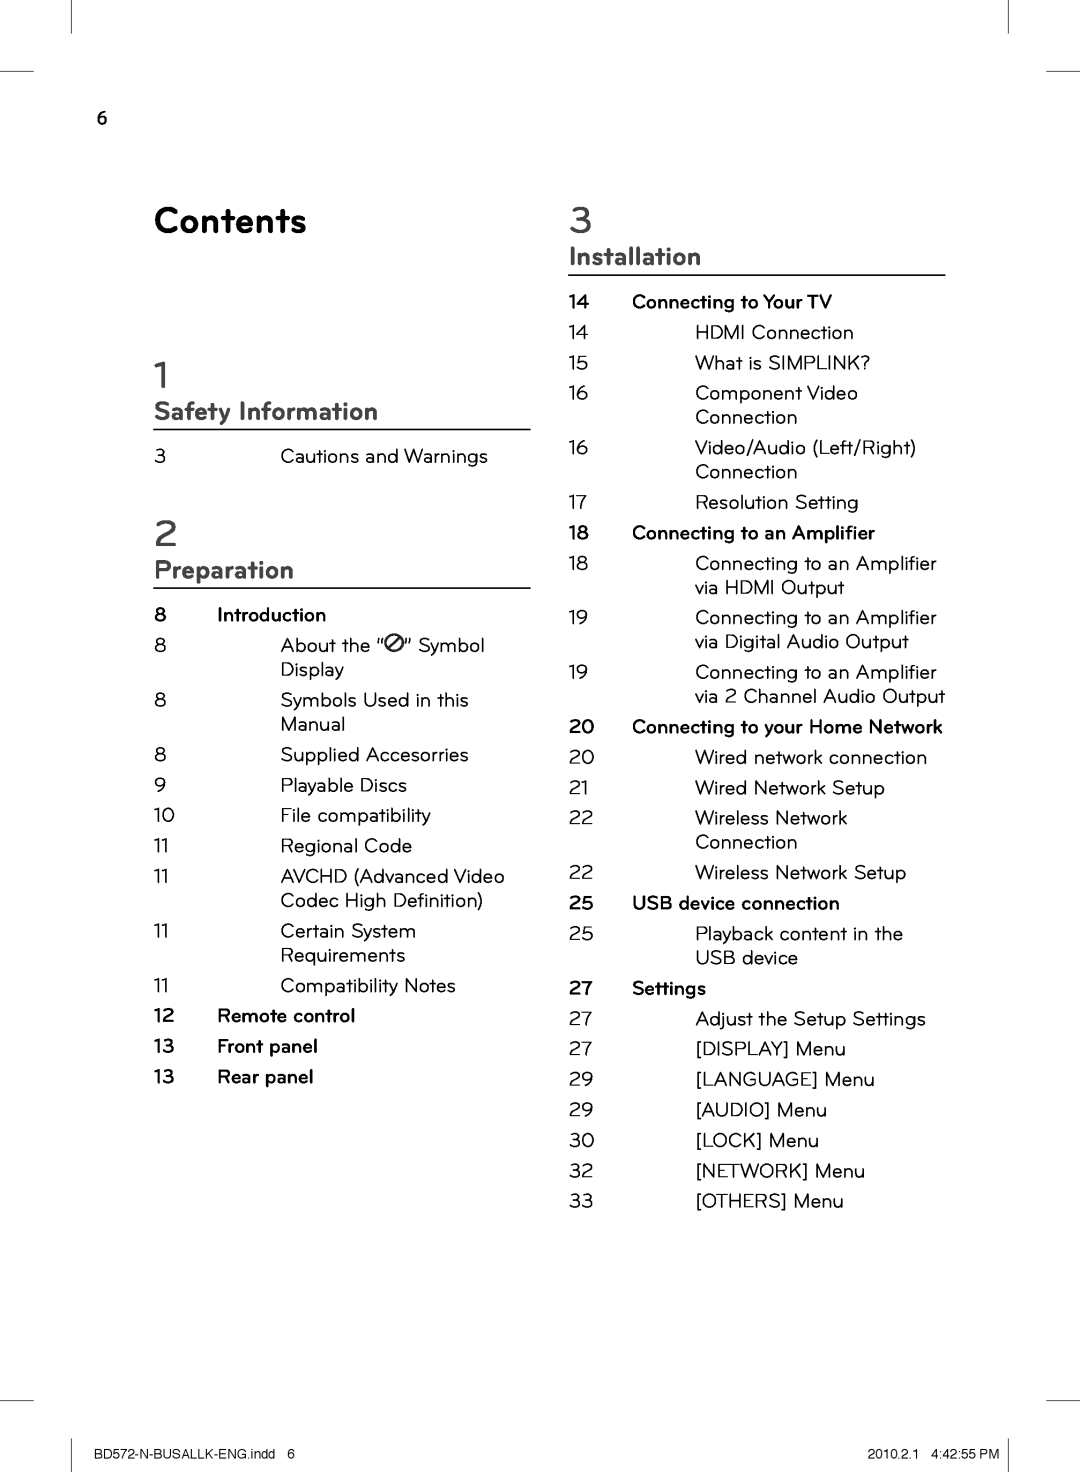 LG Electronics BD570 owner manual Contents, Safety Information, Preparation, Installation 